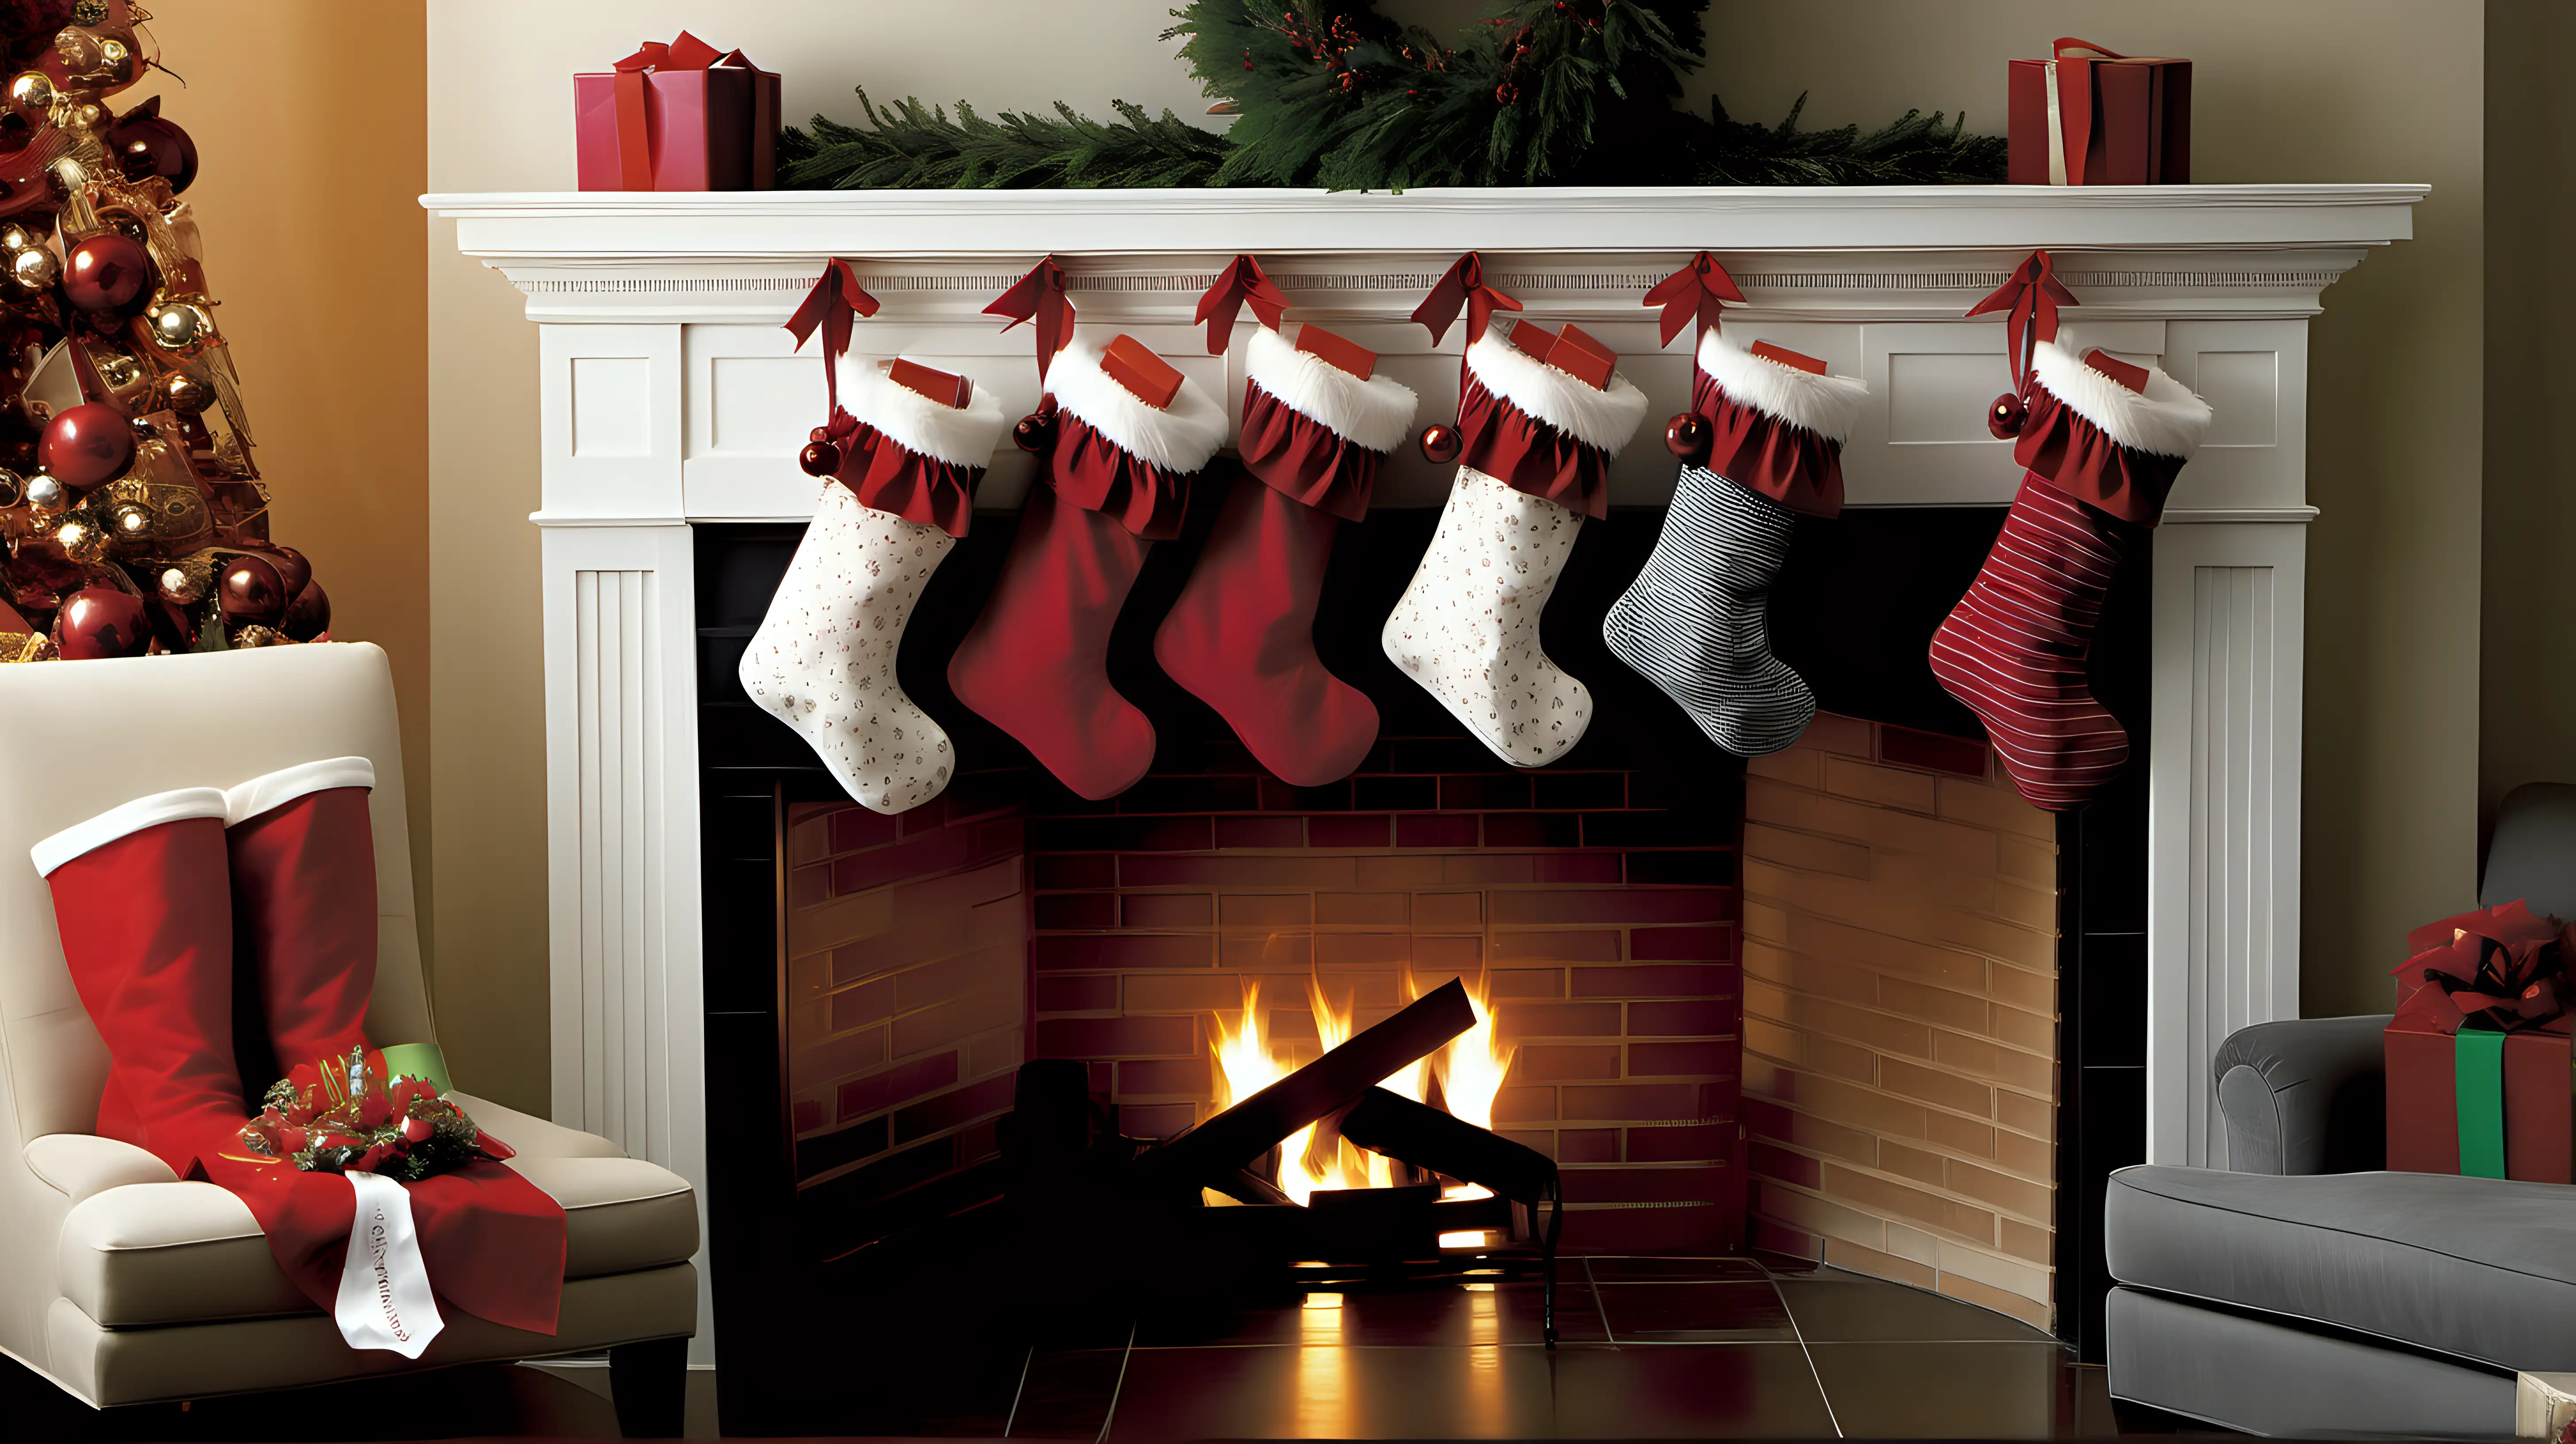 "Showcase the heartwarming tradition of hanging stockings by the fireplace, each one brimming with anticipation."